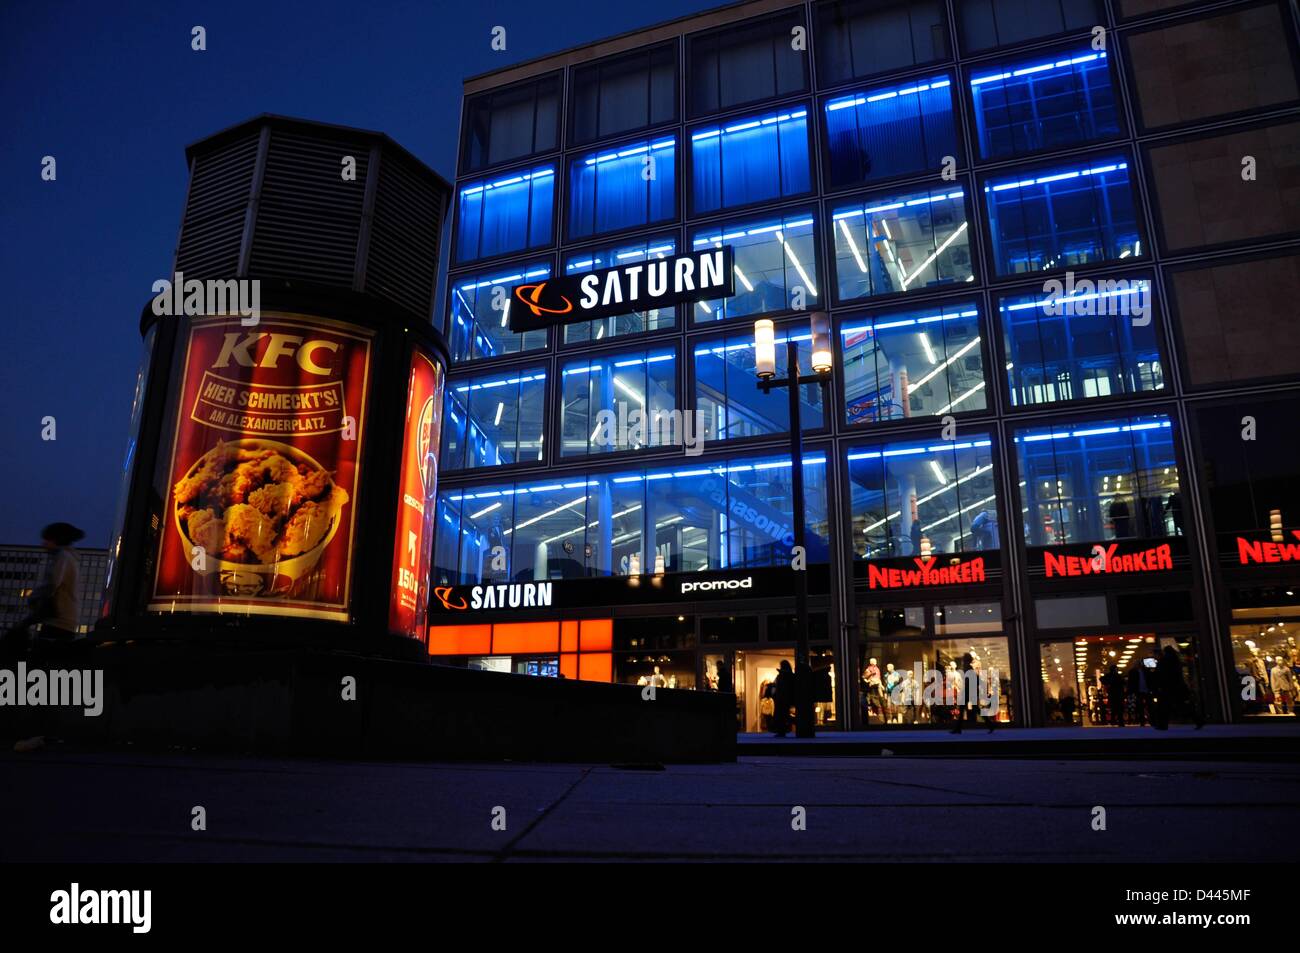 An advertising column is pictured in front of a branch of the consumer electronics retailer Saturn at Alexanderplatz in Berlin, Germany, 7 March 2011. A poster advertises the fast food chain 'Kentucky Fried Chicken', which also has a joint at Alexanderplatz. Fotoarchiv für ZeitgeschichteS.Steinach Stock Photo